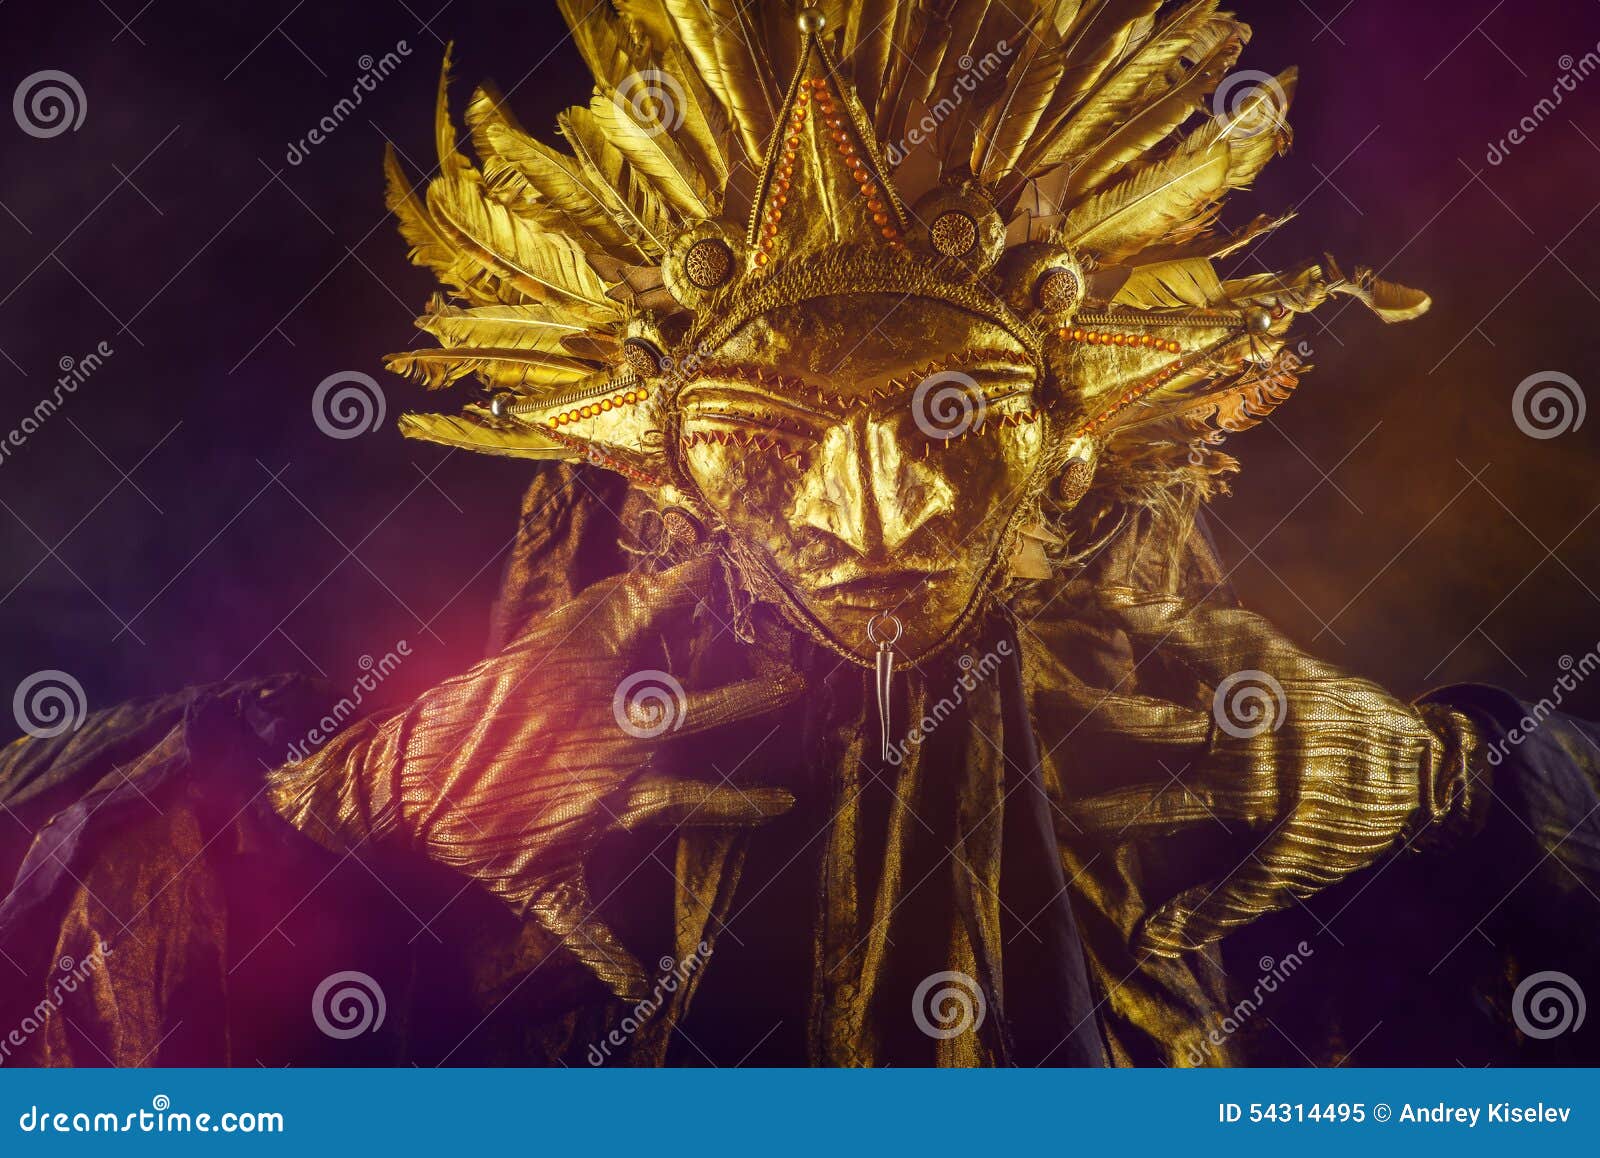 Sun mask stock image. Image of ancient, costume, folklore - 54314495